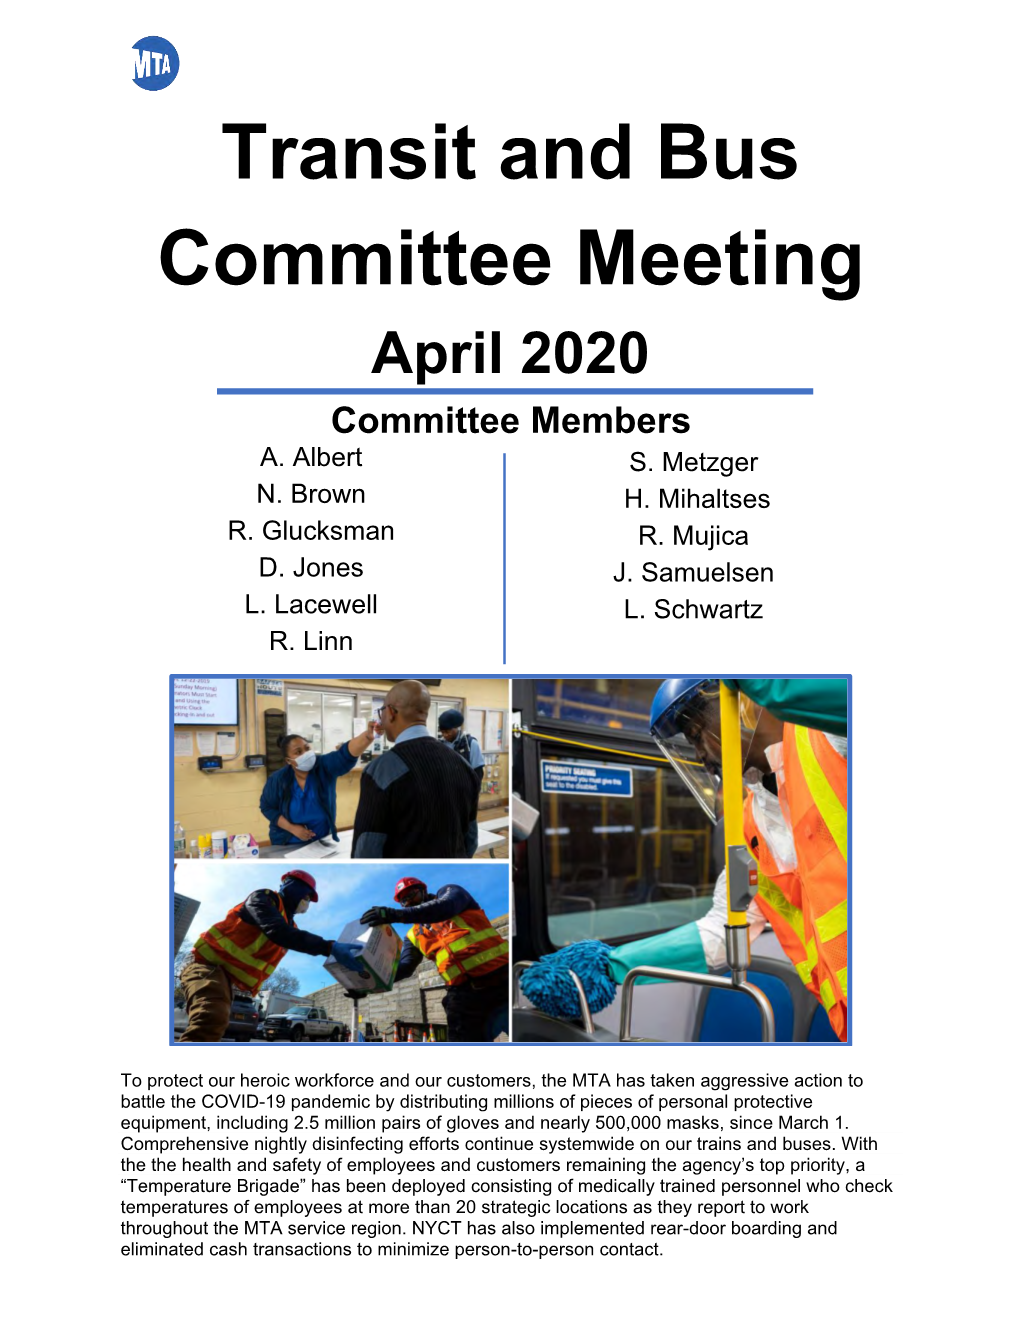 Transit and Bus Committee Meeting April 2020